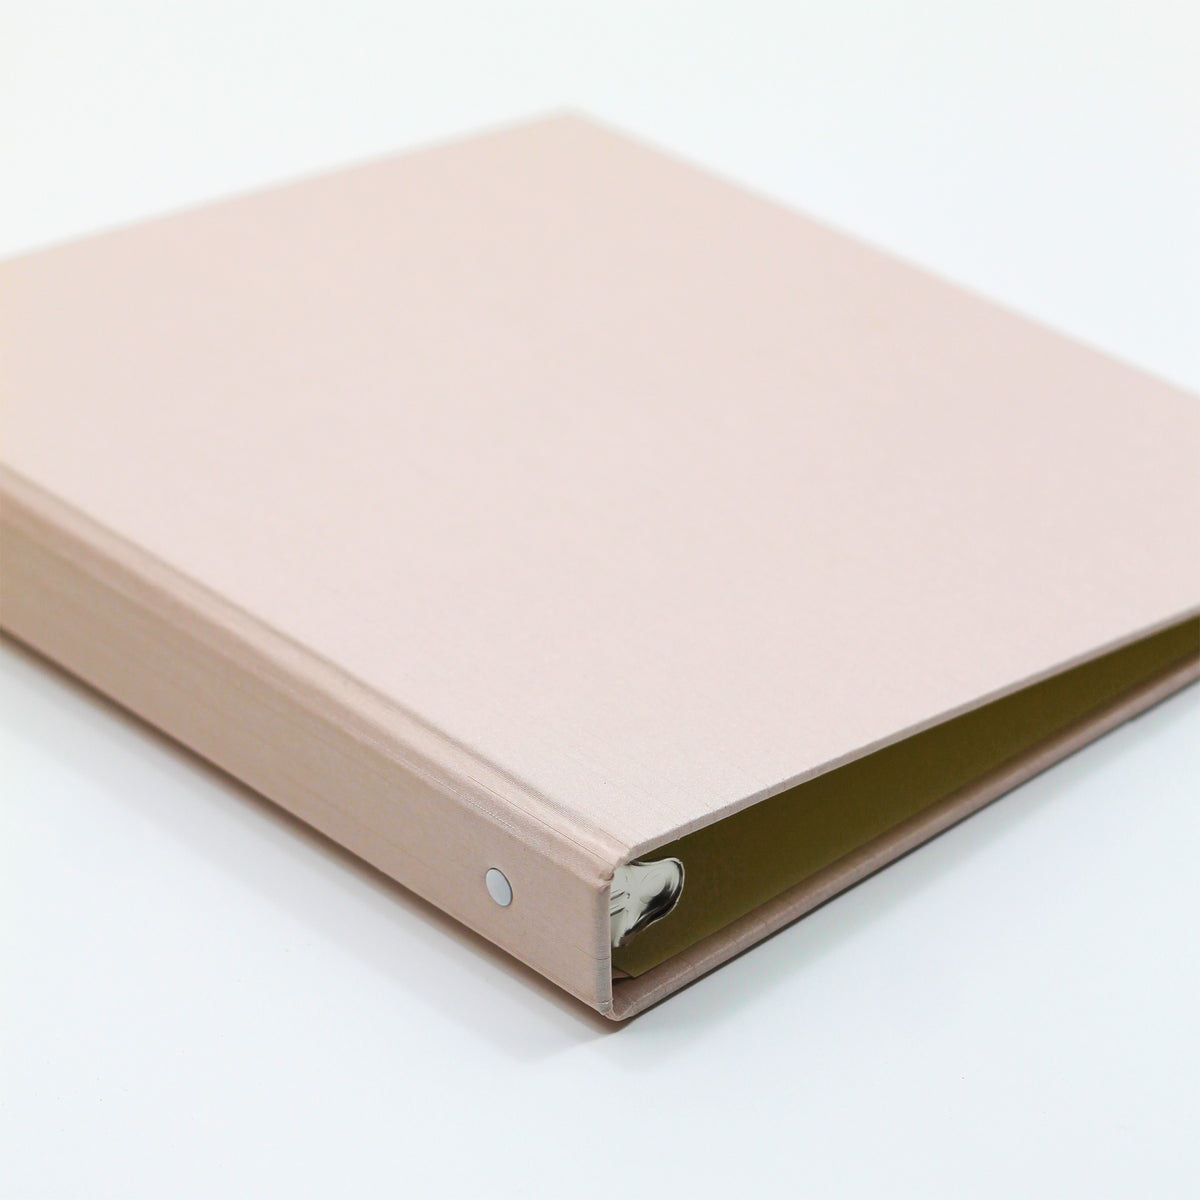 Storage Binder for Photos or Documents with Blush Pink Silk Cover